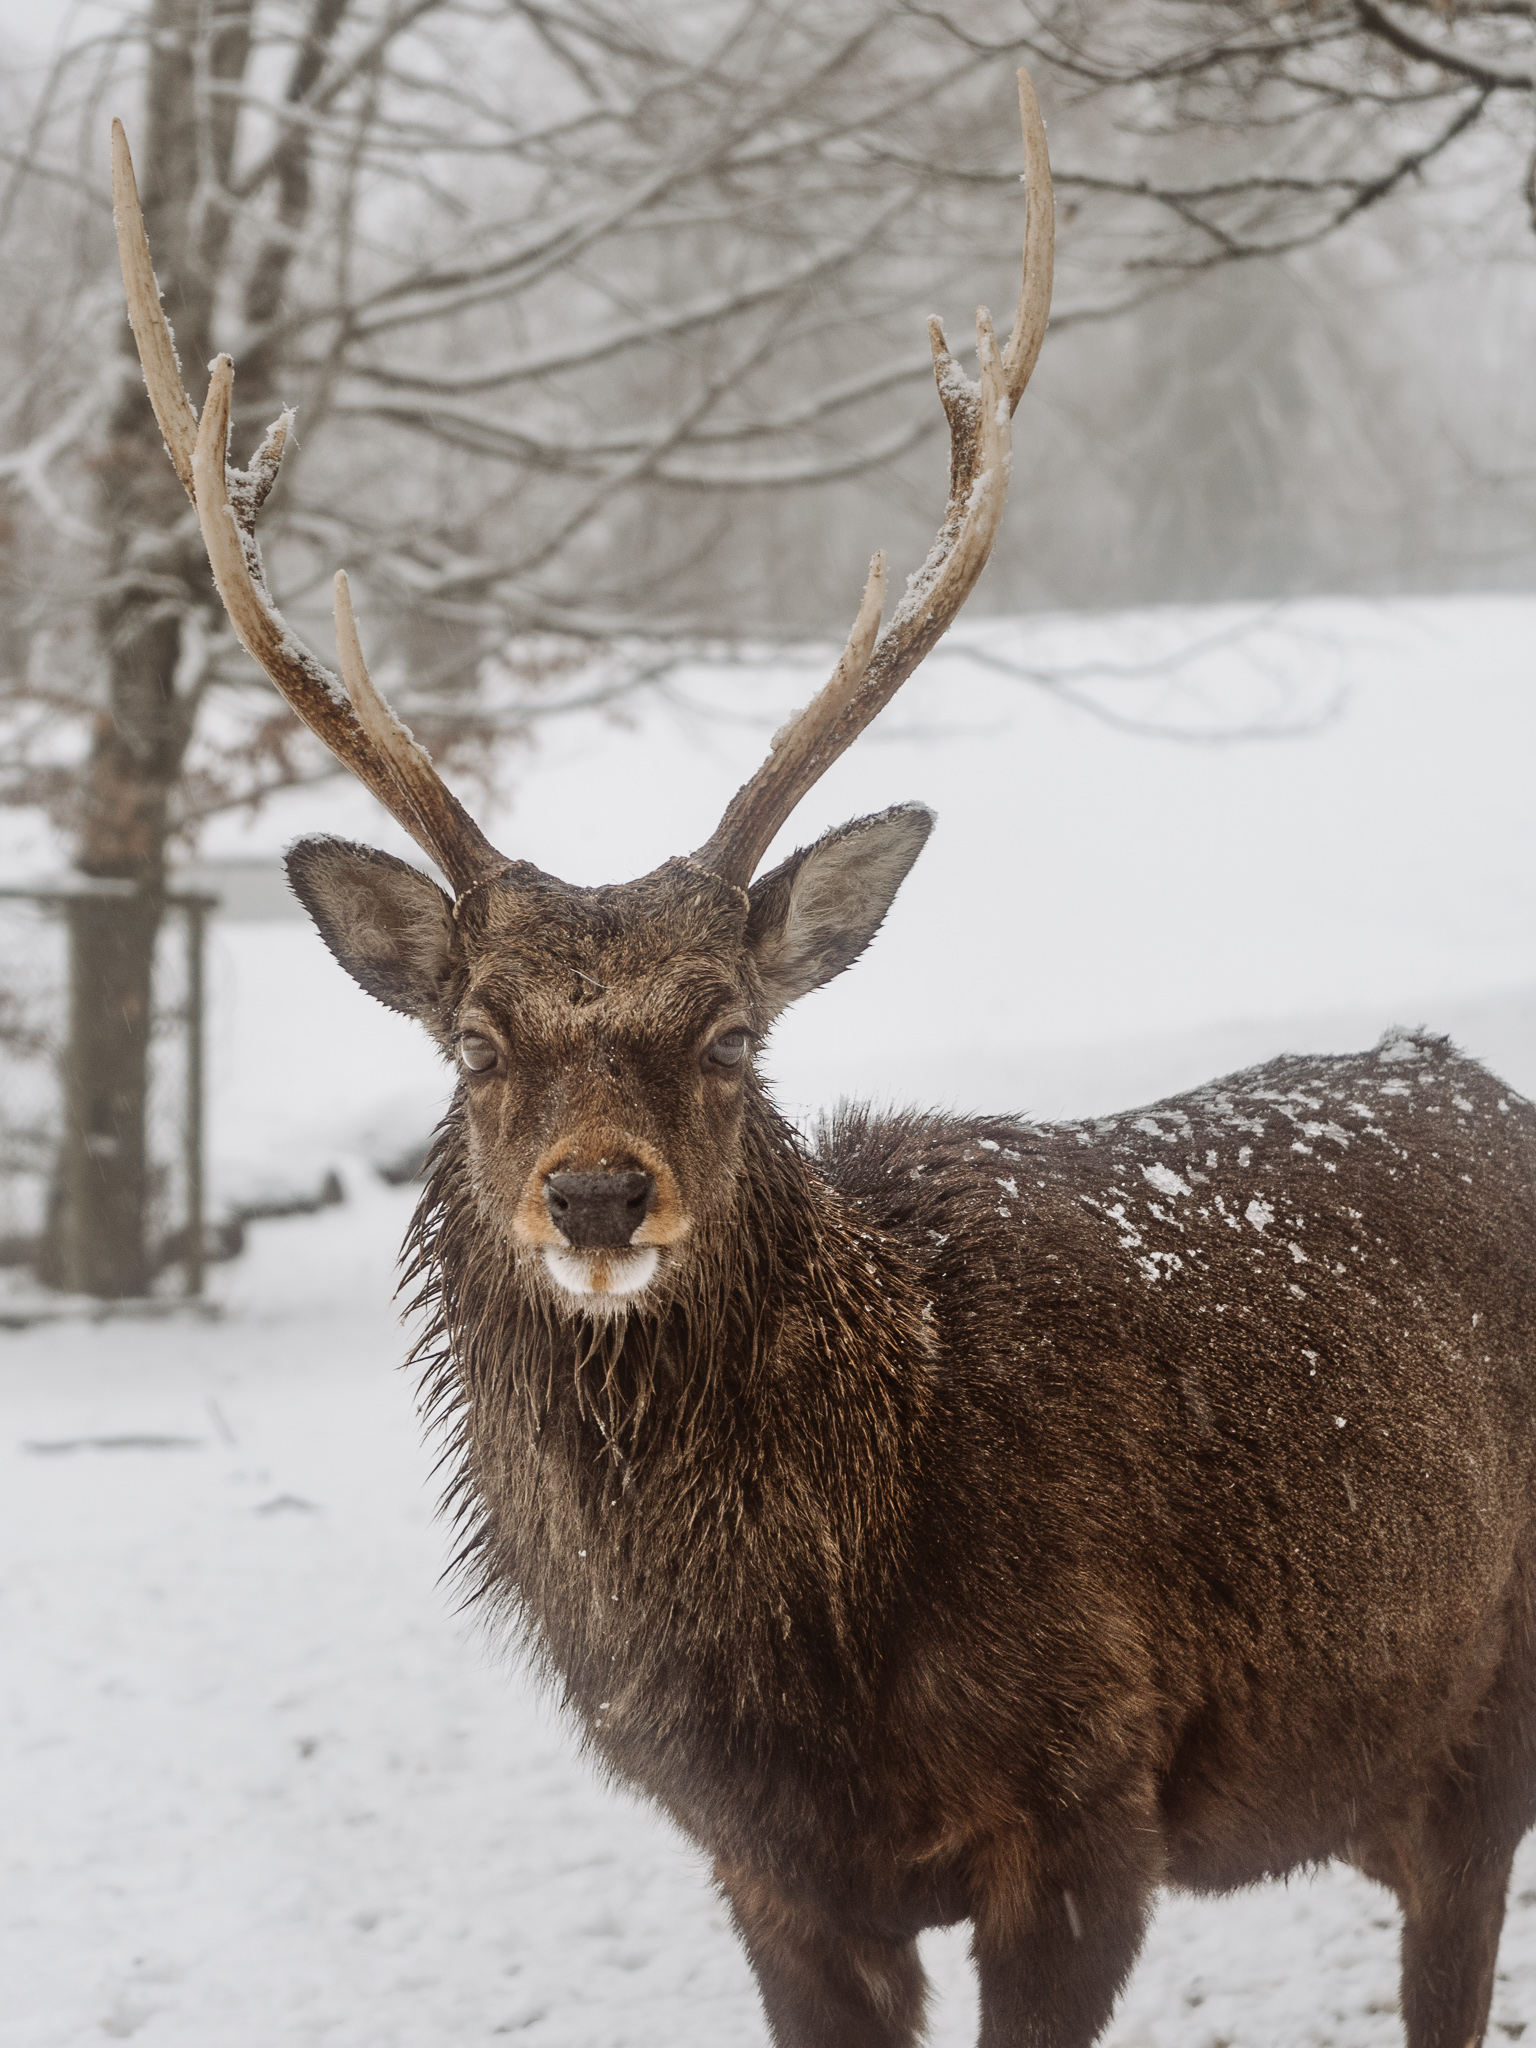 a picture of a deer in the snow at the Peter & Paul wildlife Park in St. Galen in winter. The deer has long antlers and is facing the camera, with snow on his fur and antlers.